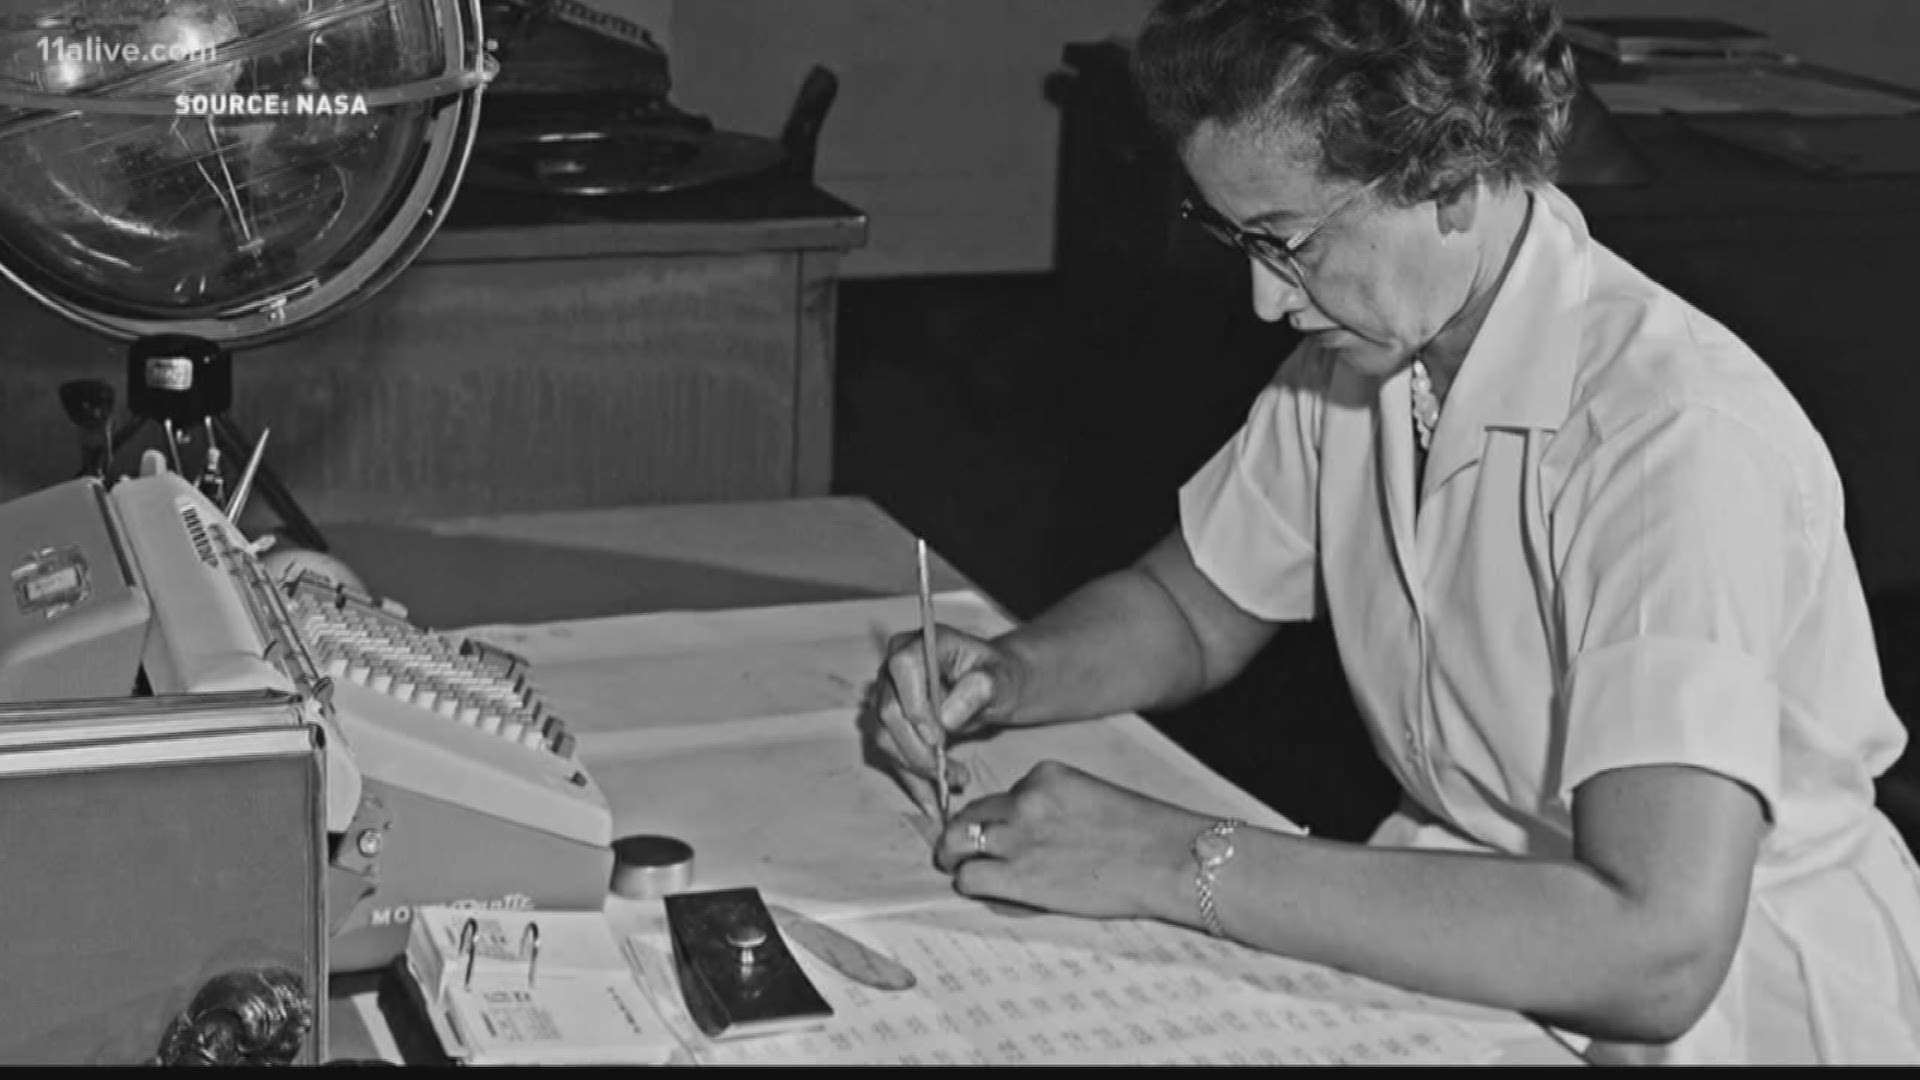 Johnson was a NASA mathematician whose legacy was portrayed in the film 'Hidden Figures.'